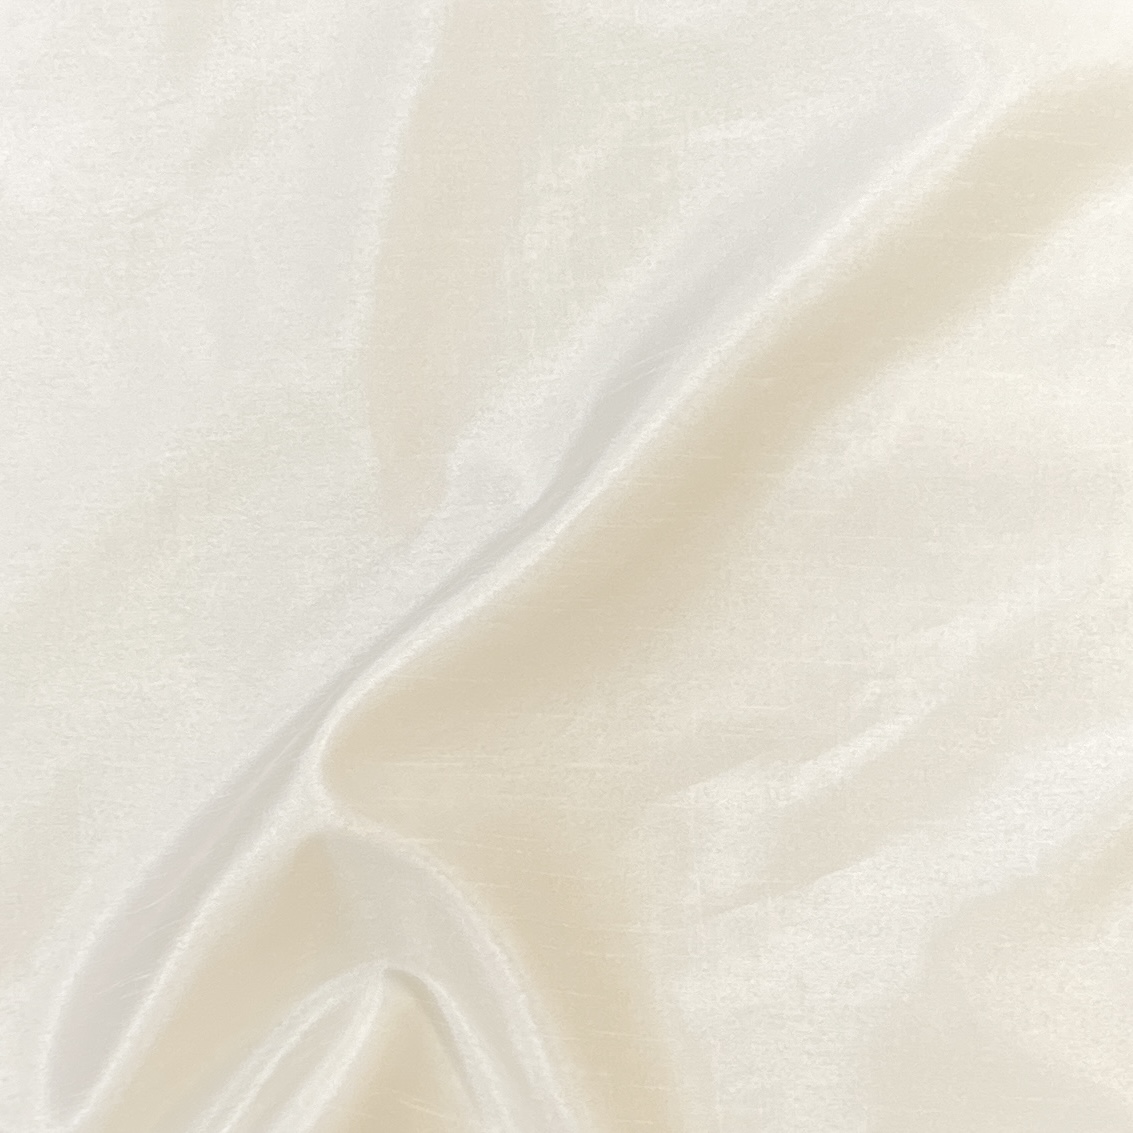 Rent the Shantung White 132 Round Linen